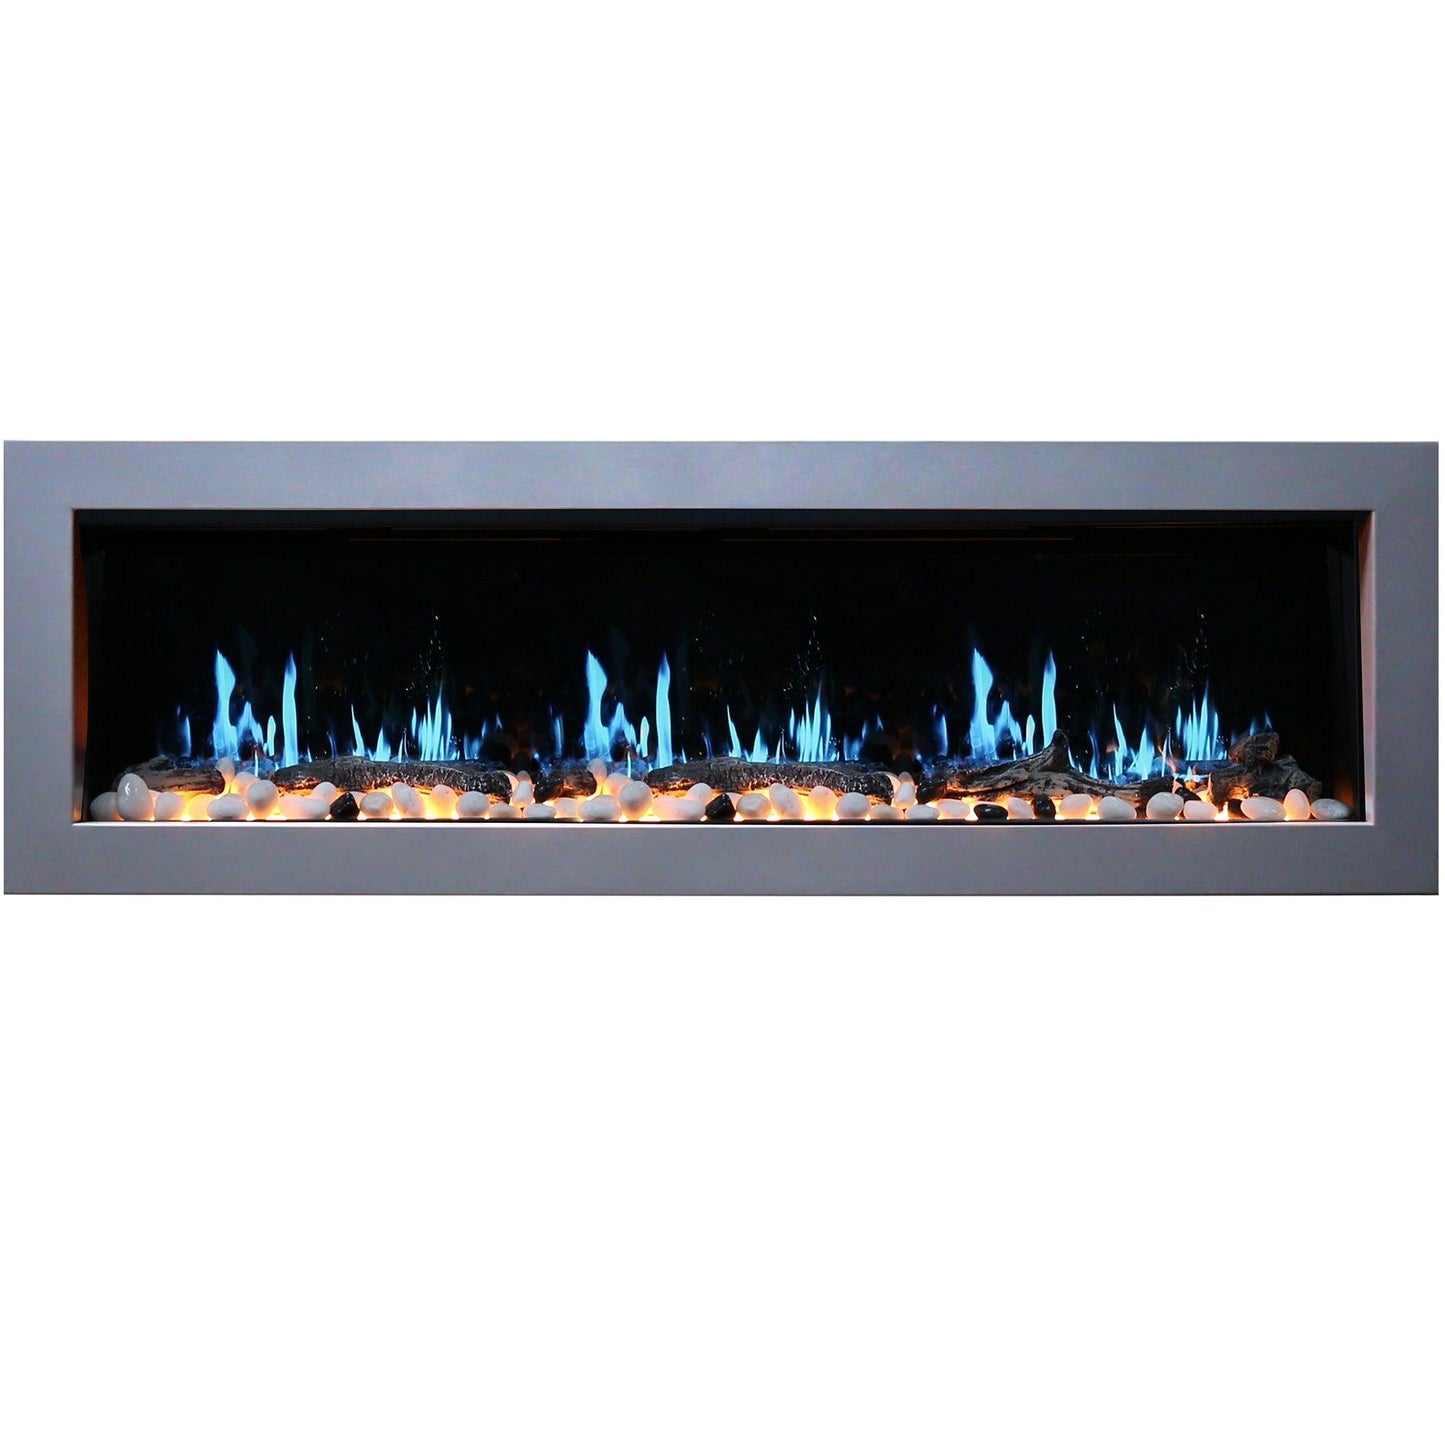 ZopaFlame™ 78" Linear Wall-mount Electric Fireplace - SP19788V - ZopaFlame Fireplaces